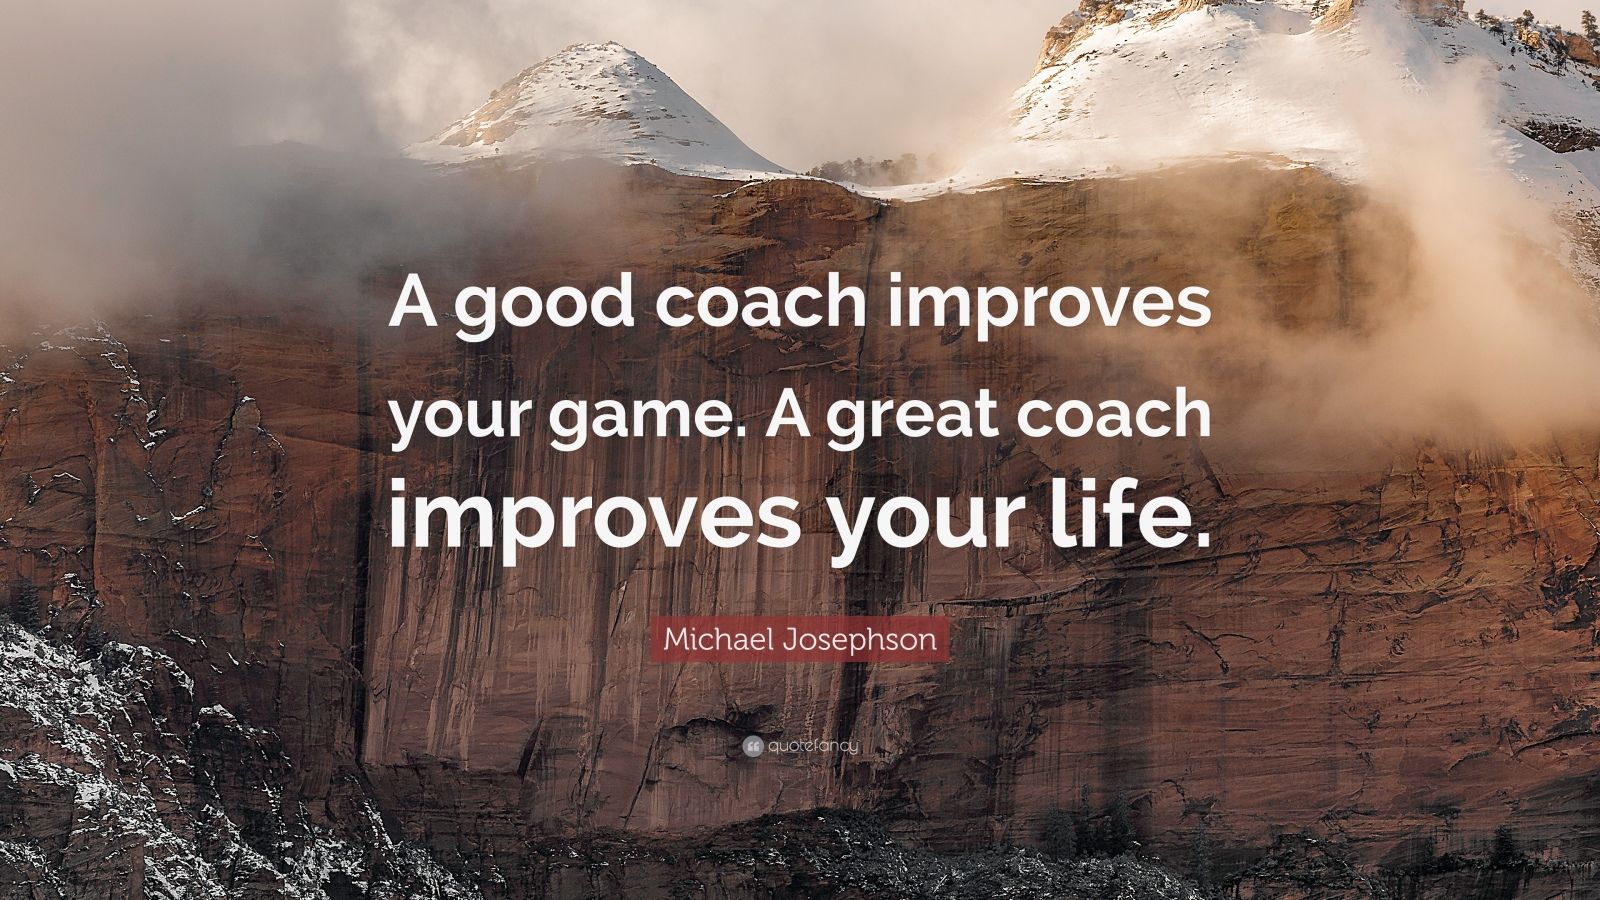 Michael Josephson Quote: “A good coach improves your game. A great